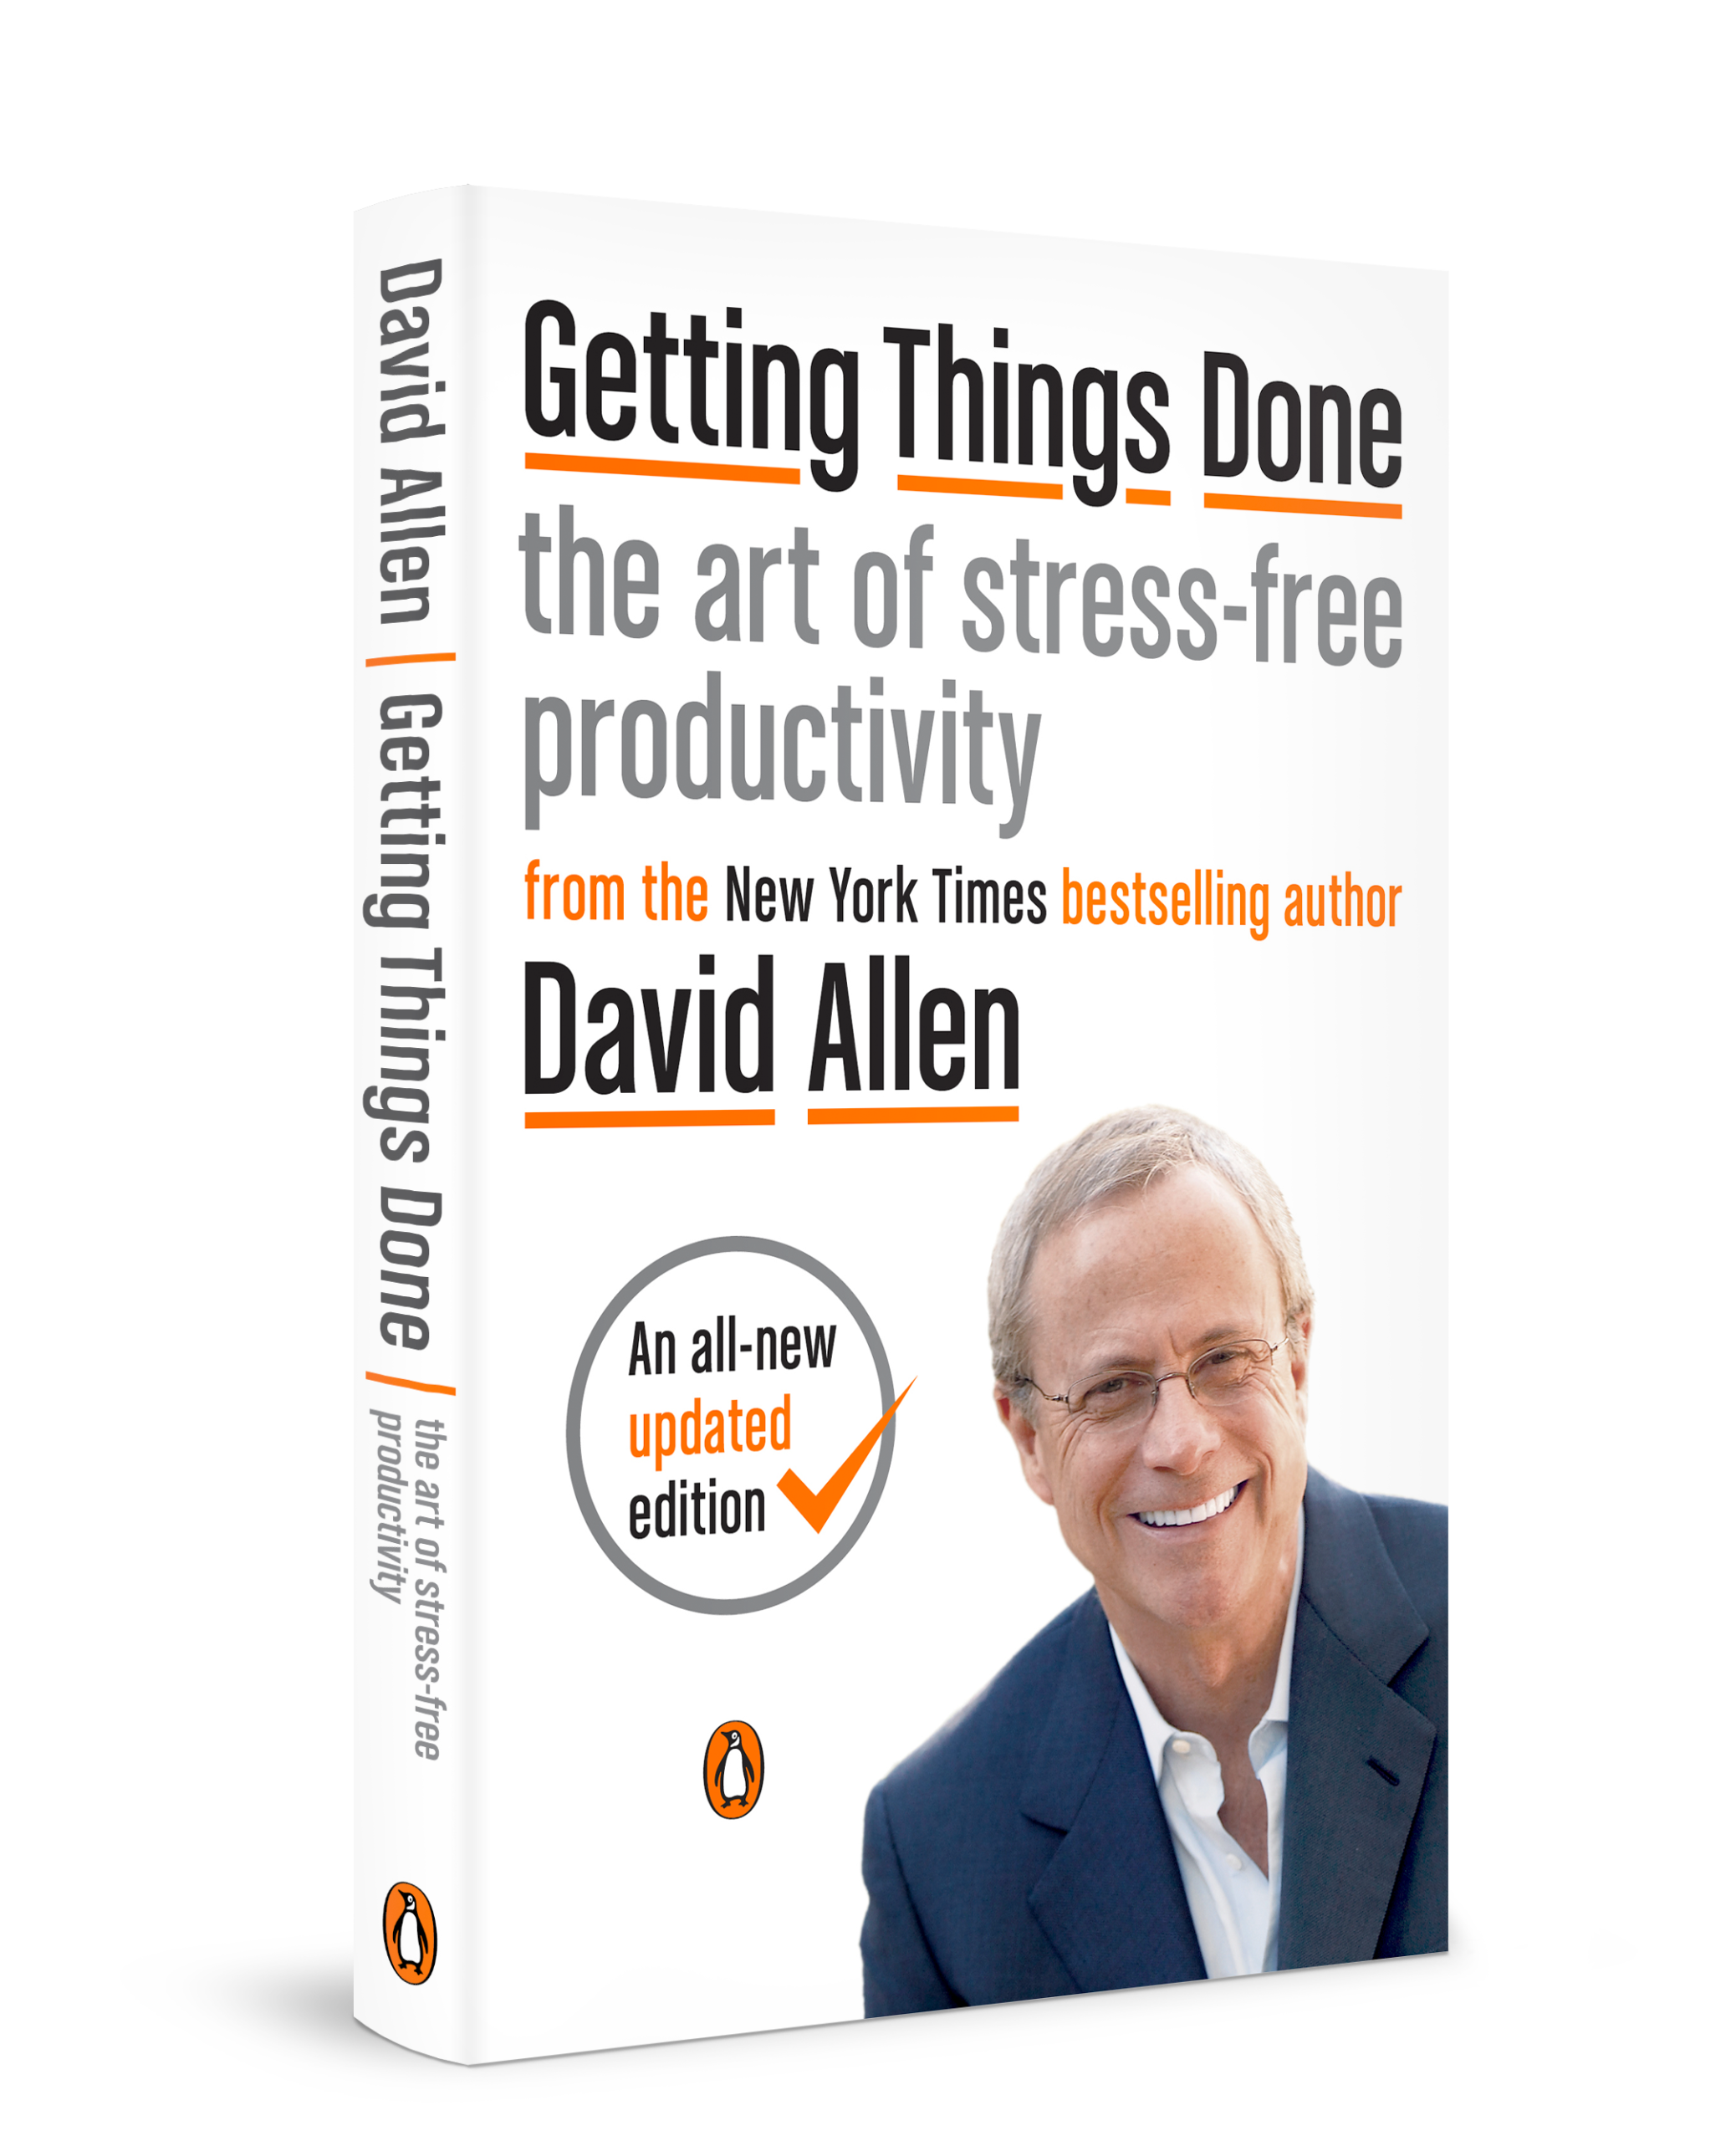 Getting Things Done® (GTD) book cover